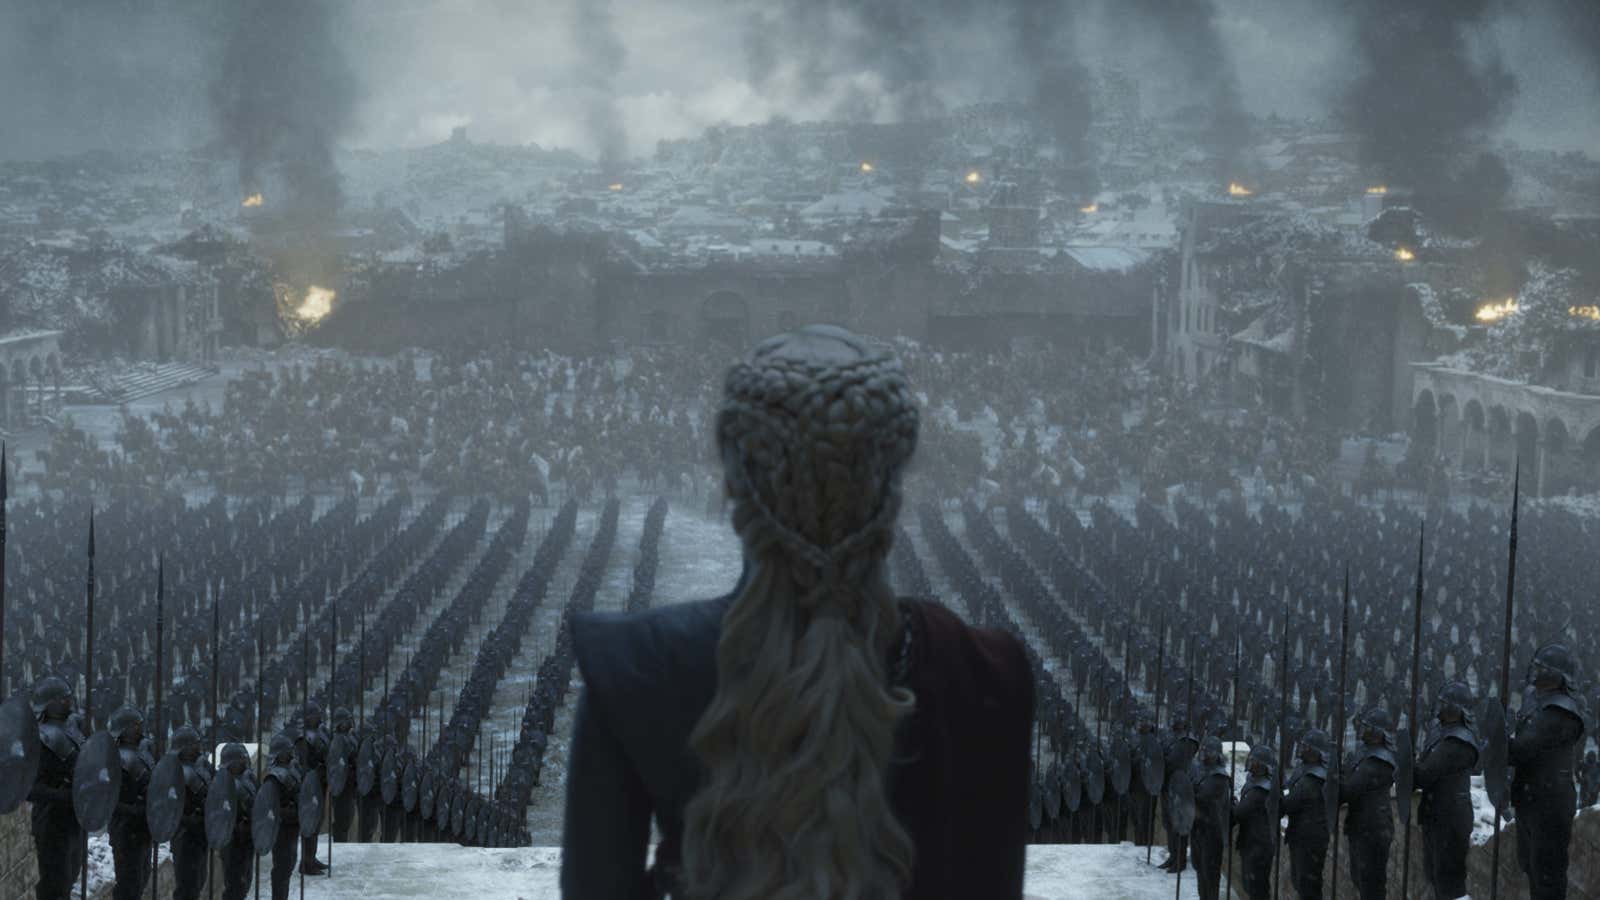 Game of Thrones: How (and where) to watch HBO's Game of Thrones